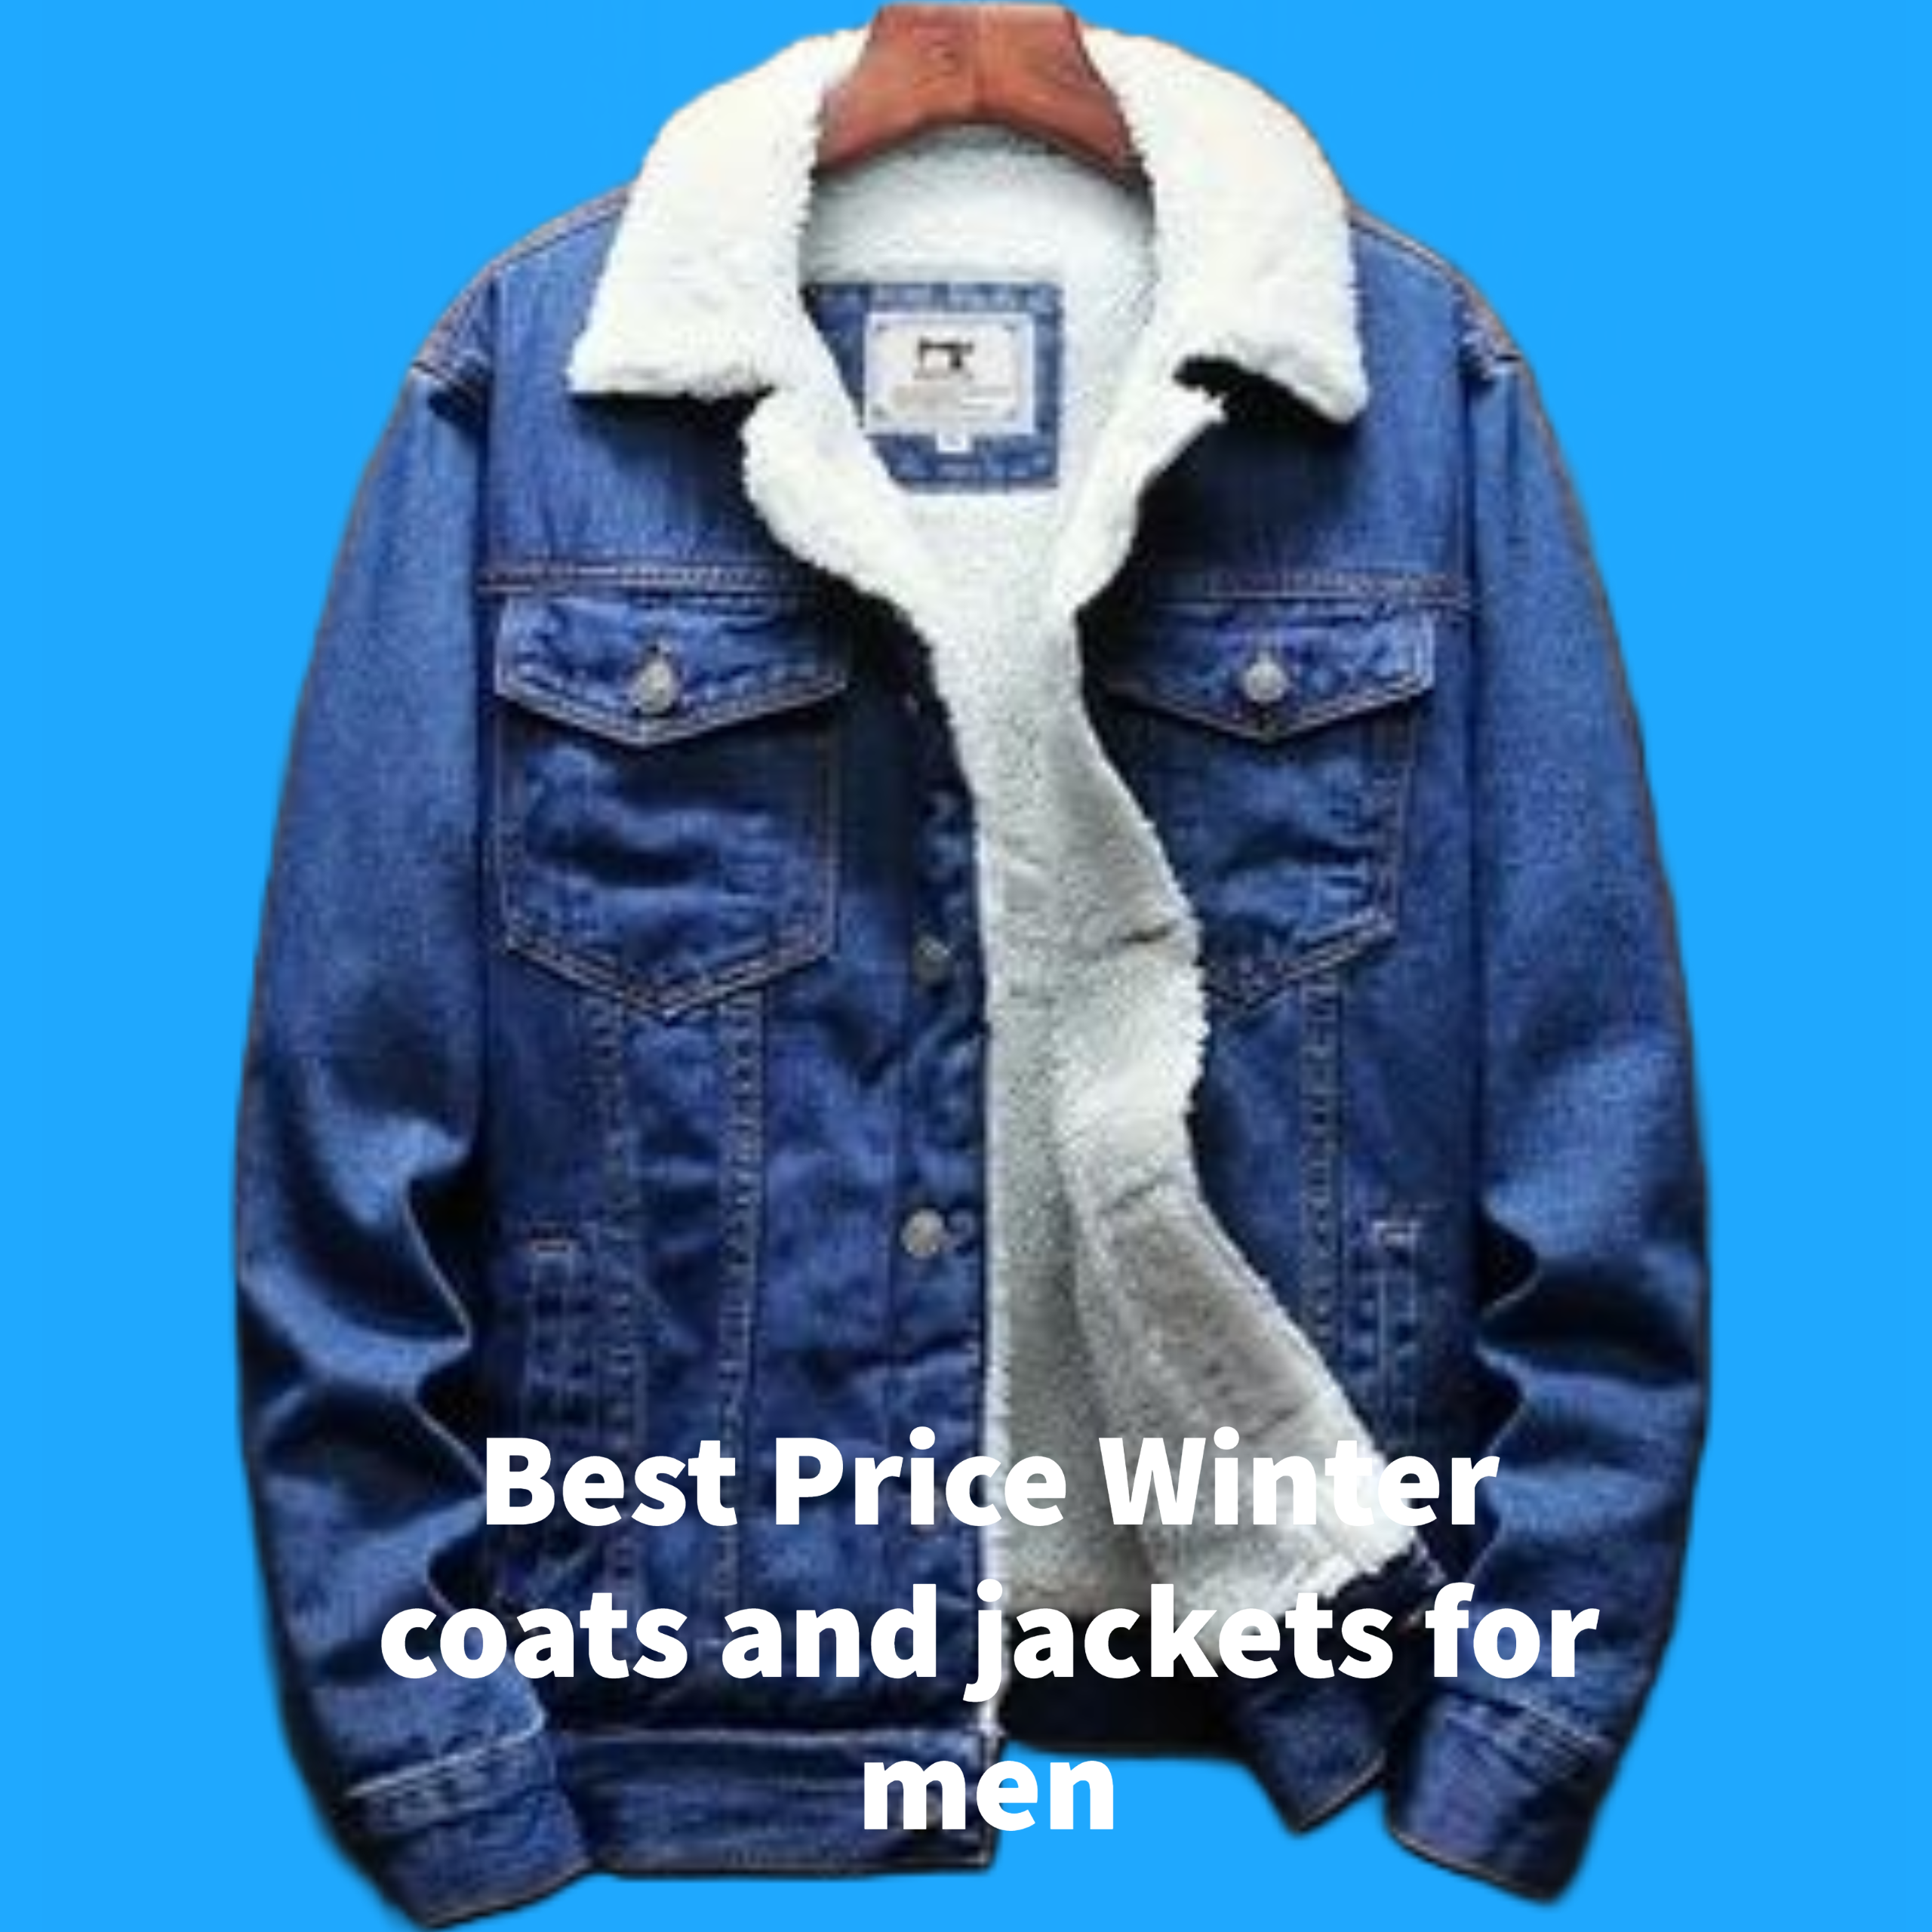 shop coats, jackets, denim for men at best price in Nepal